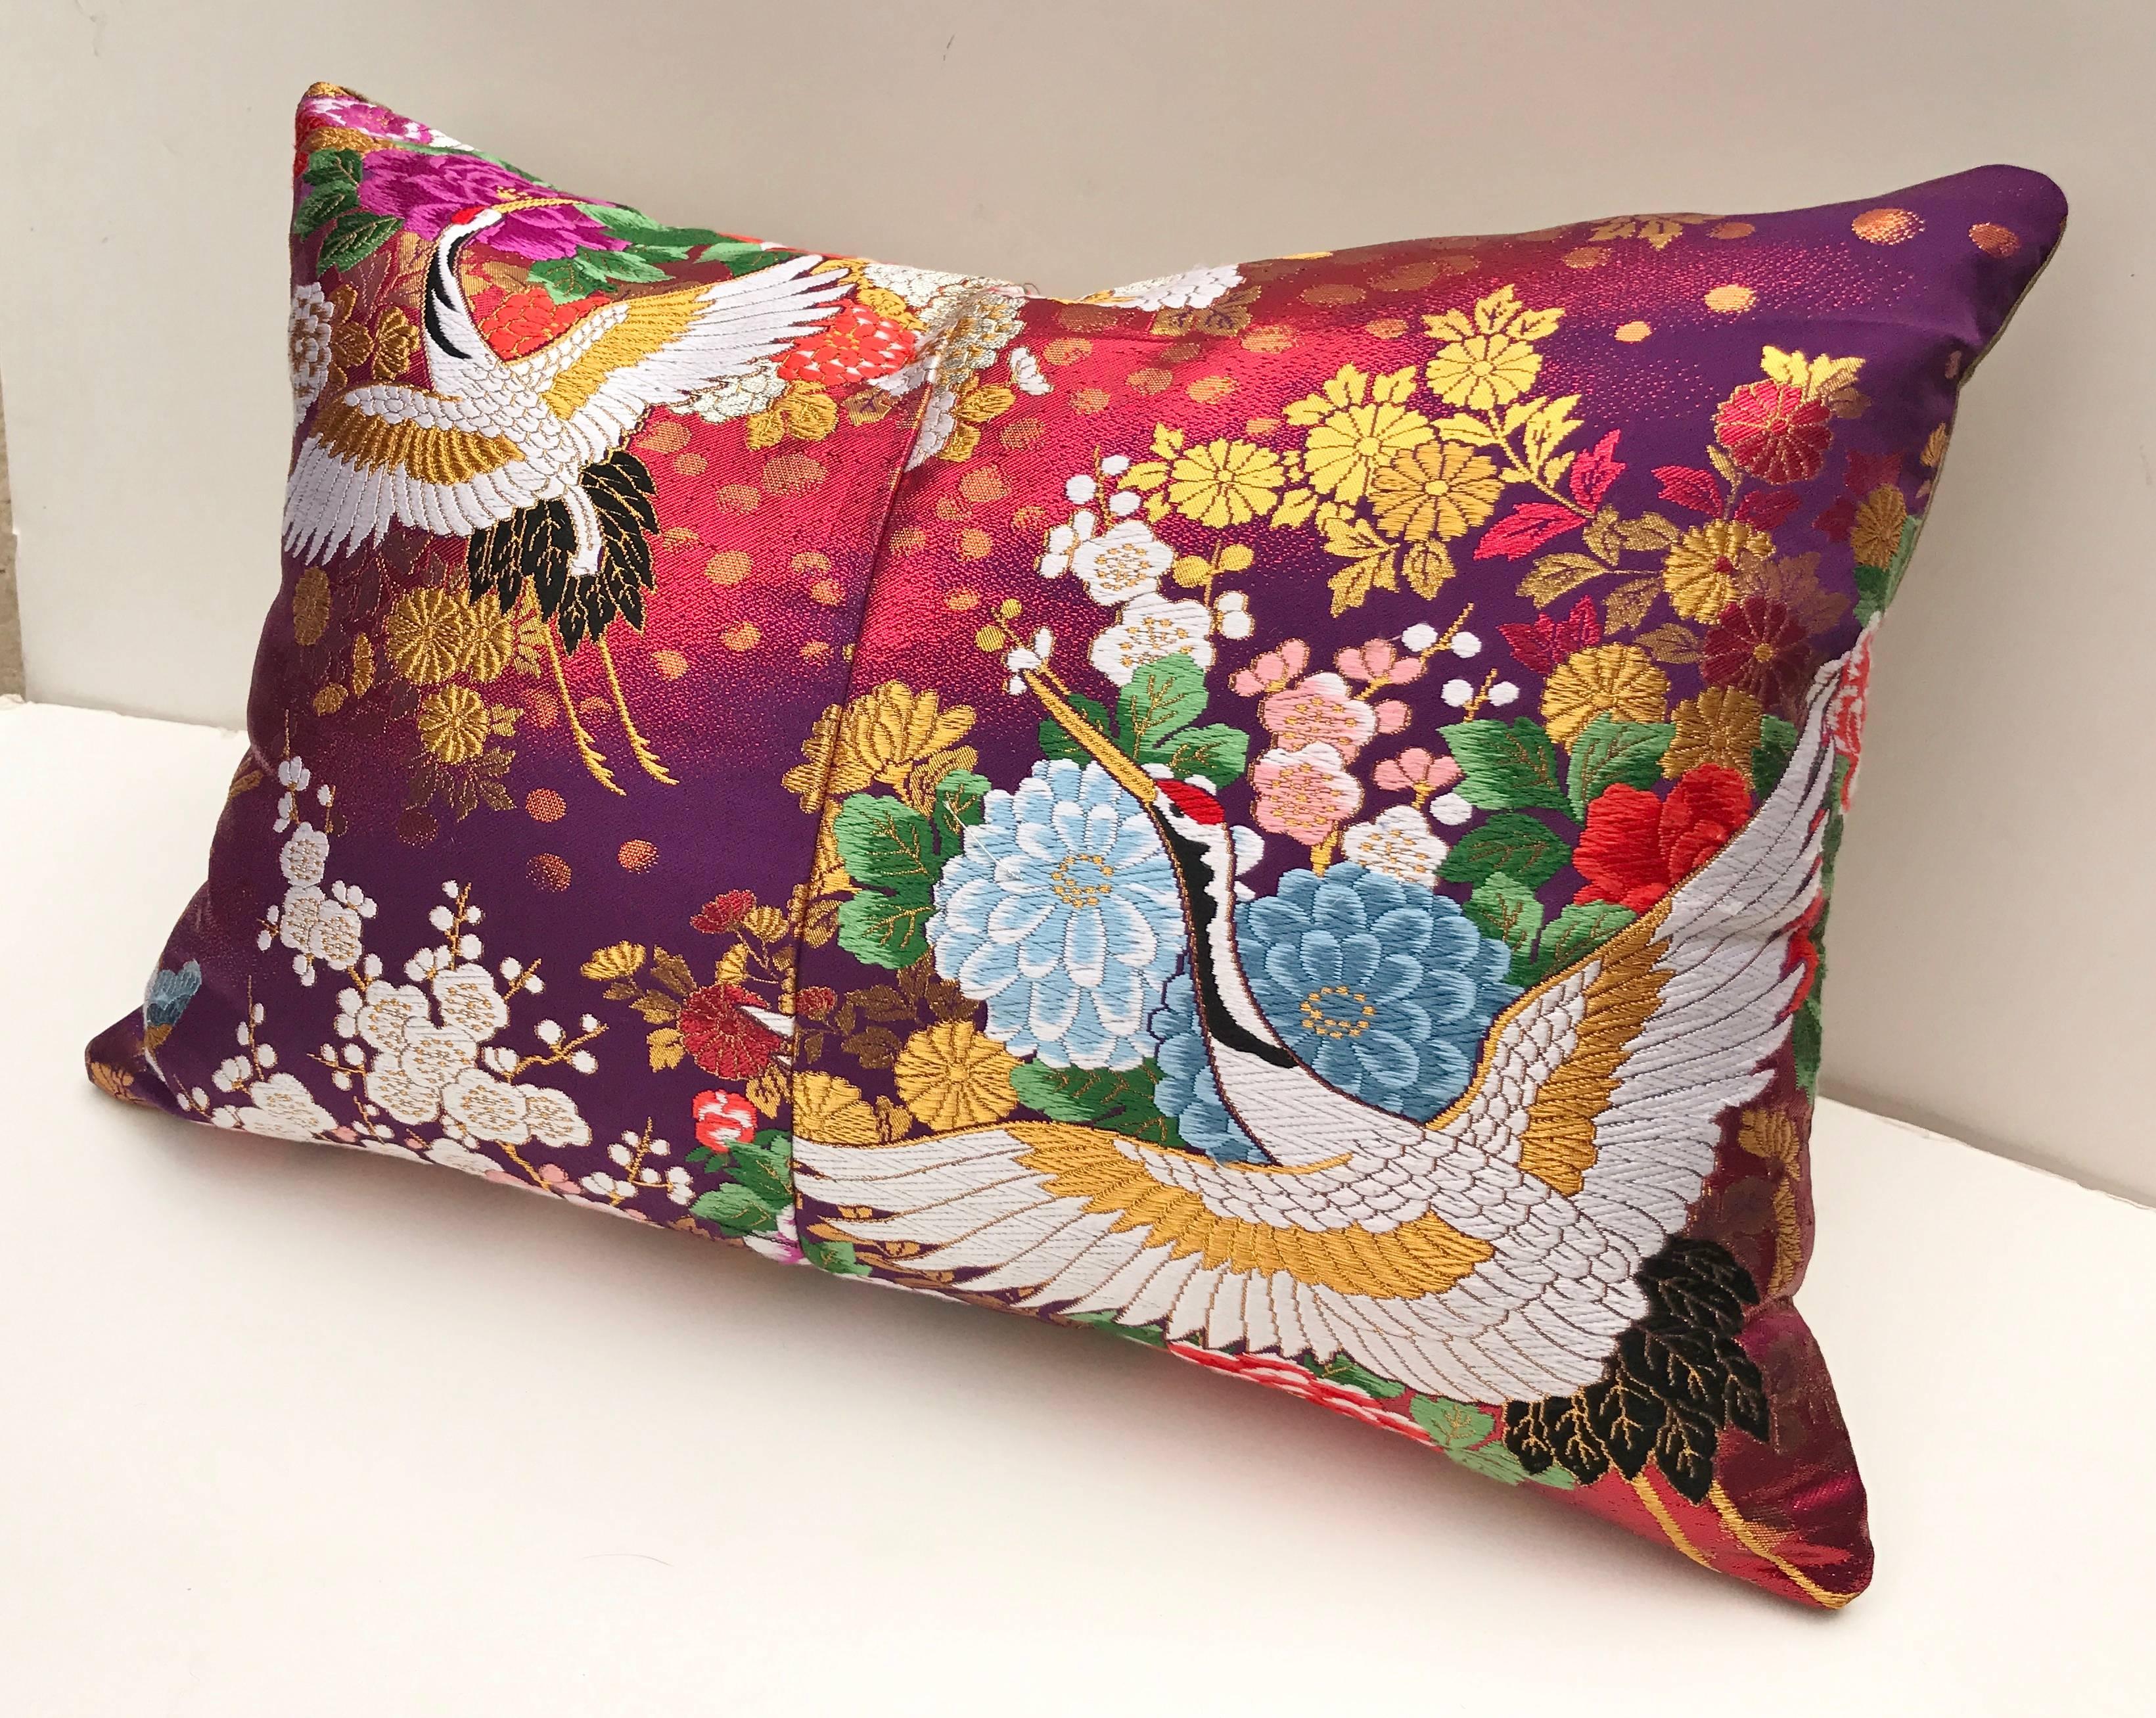 Custom pillow cut from a vintage woven silk Japanese uchikake, the traditional wedding kimono. The pillow has vibrant color with traditional Japanese designs. It is backed in a putty color silk, filled with a 100% down insert and hand-sewn closed.